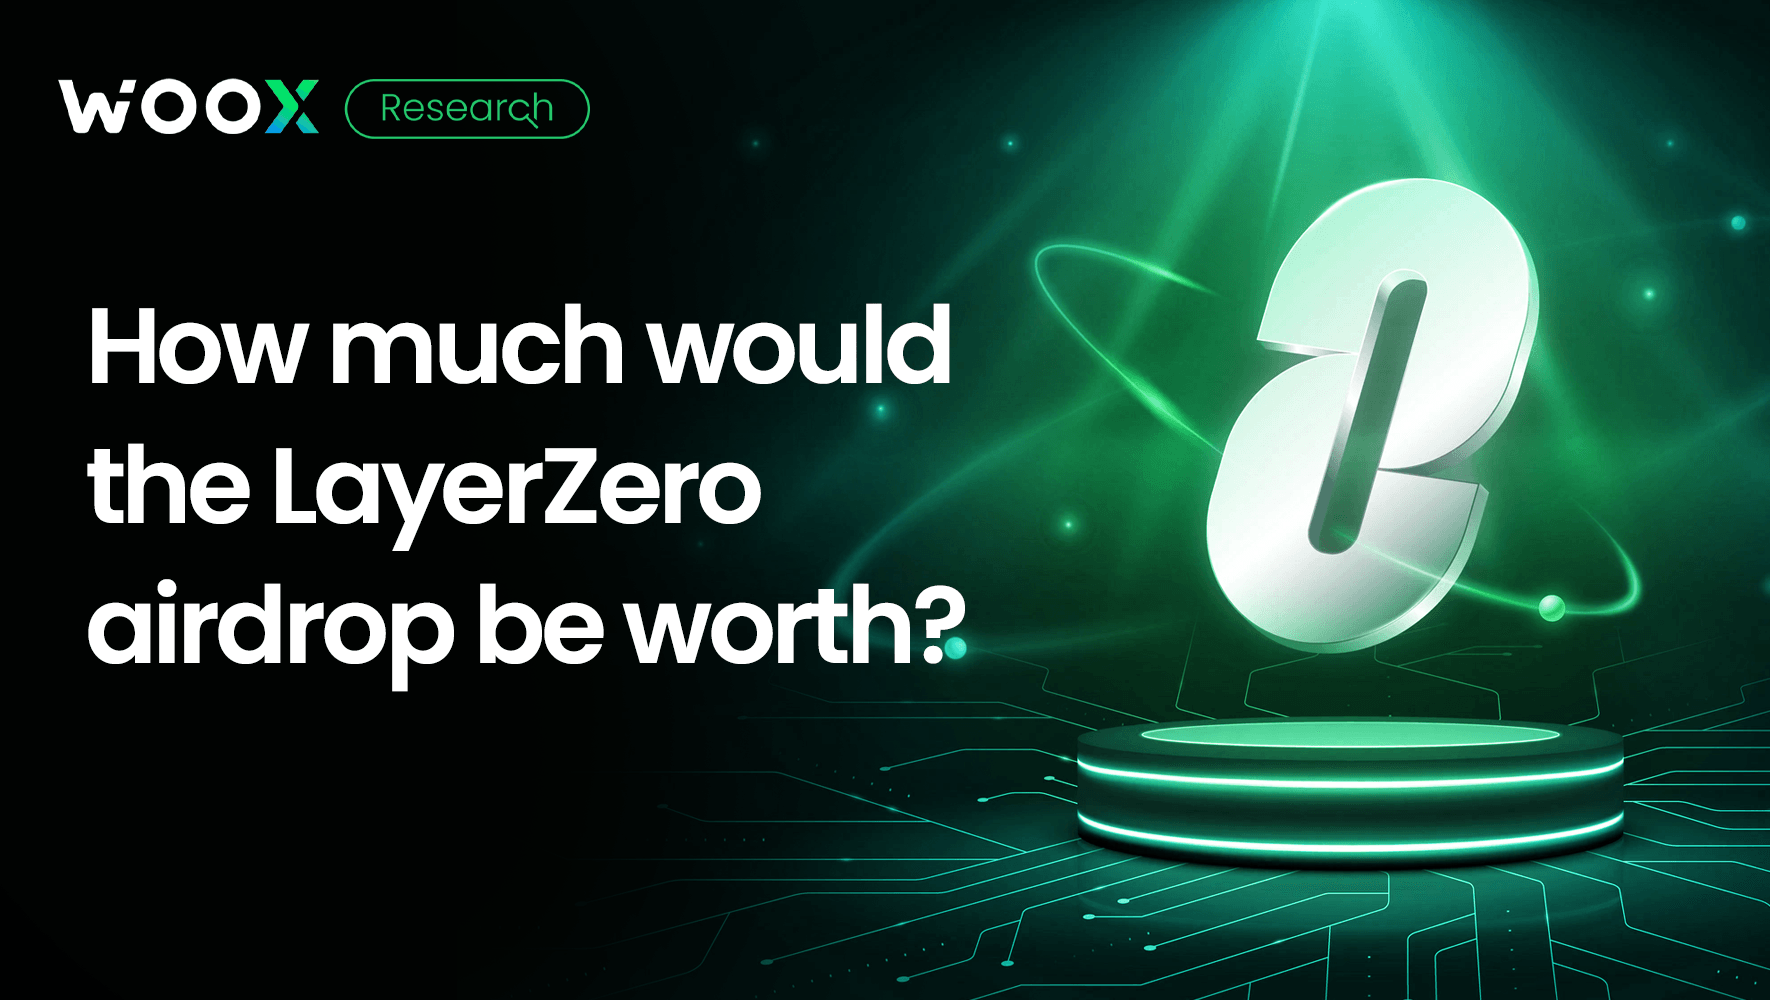 WOO X Research sees LayerZero airdrop value between $600 million and $1 billion